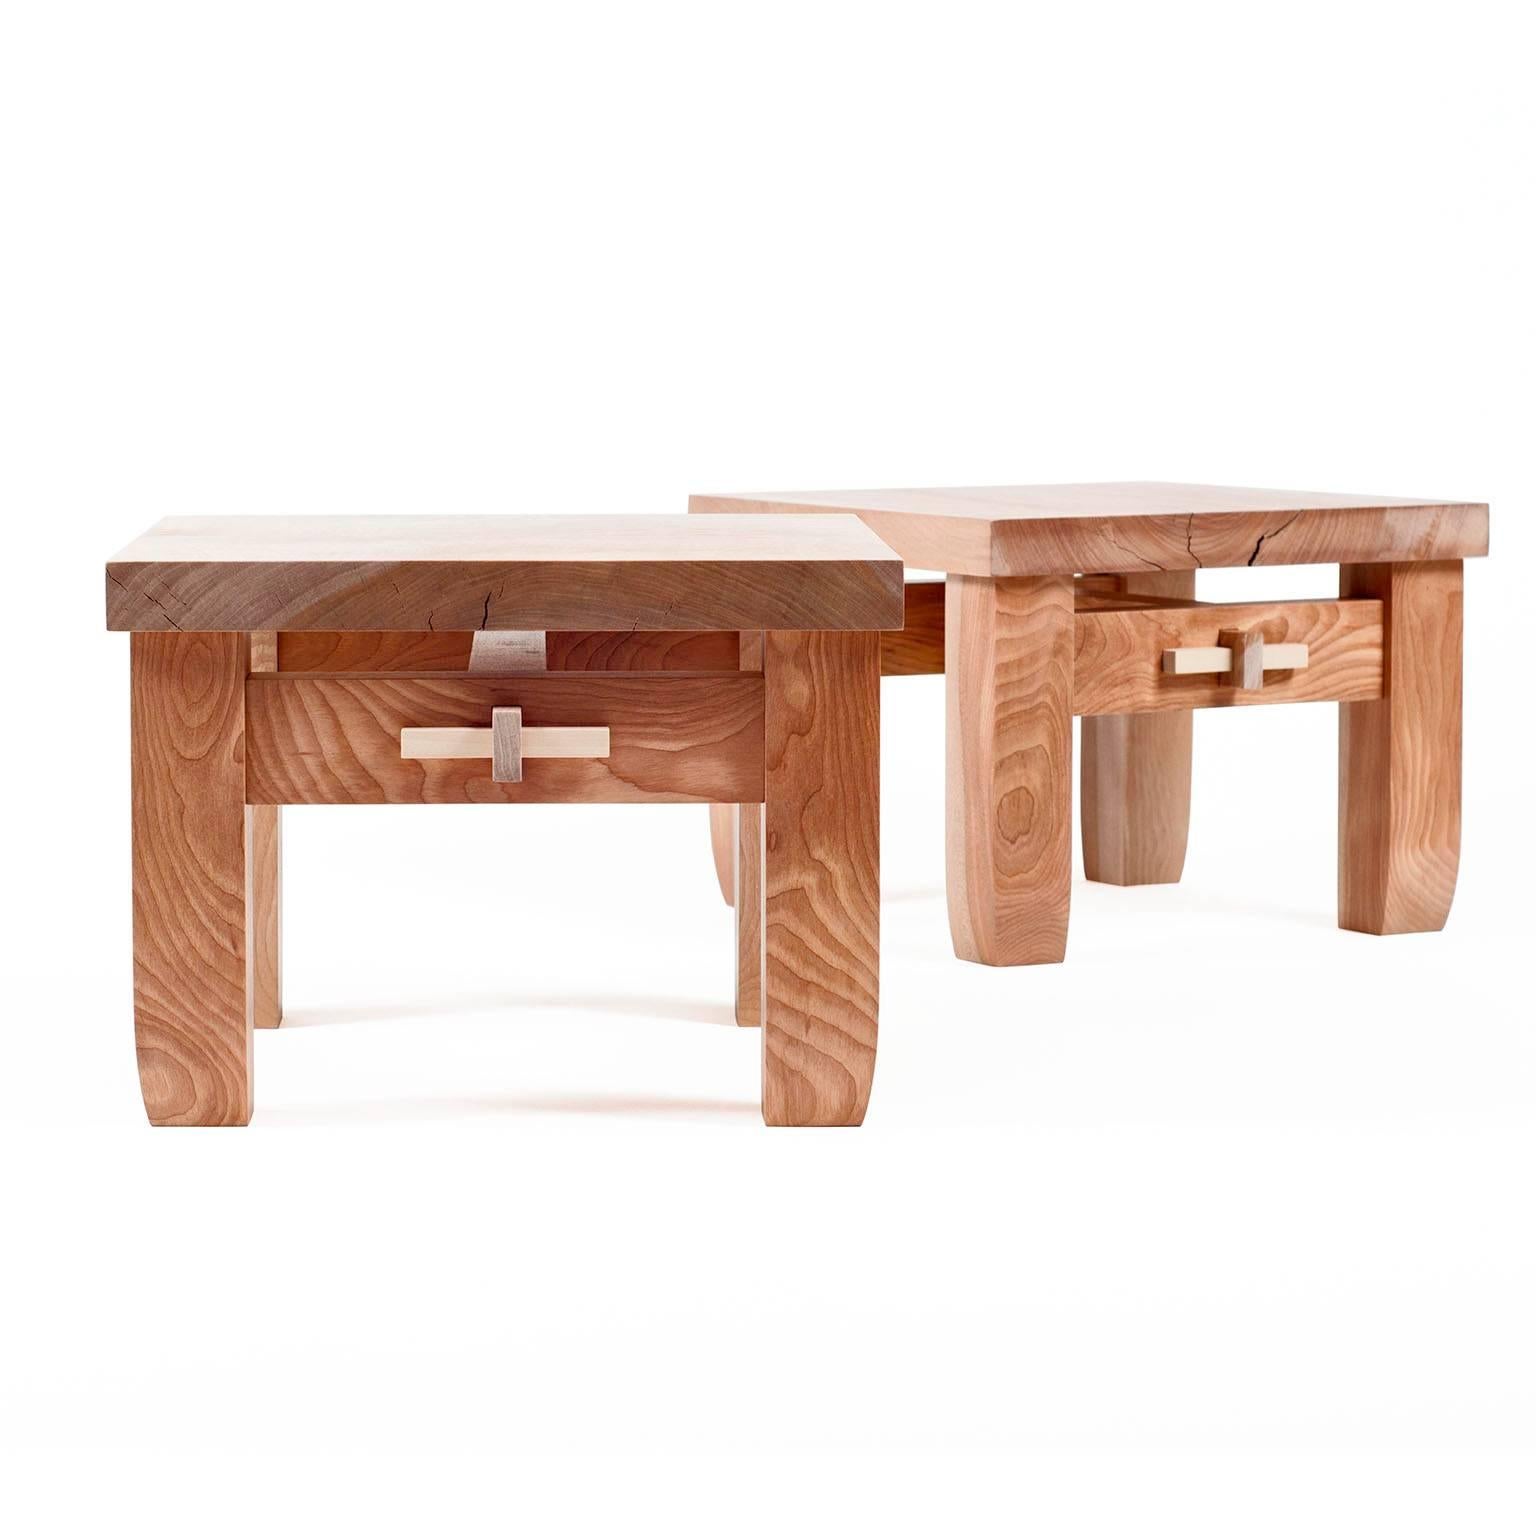 American Contemporary Black Birch Hardwood Low Prayer Stool Set Made in Brooklyn in Stock For Sale